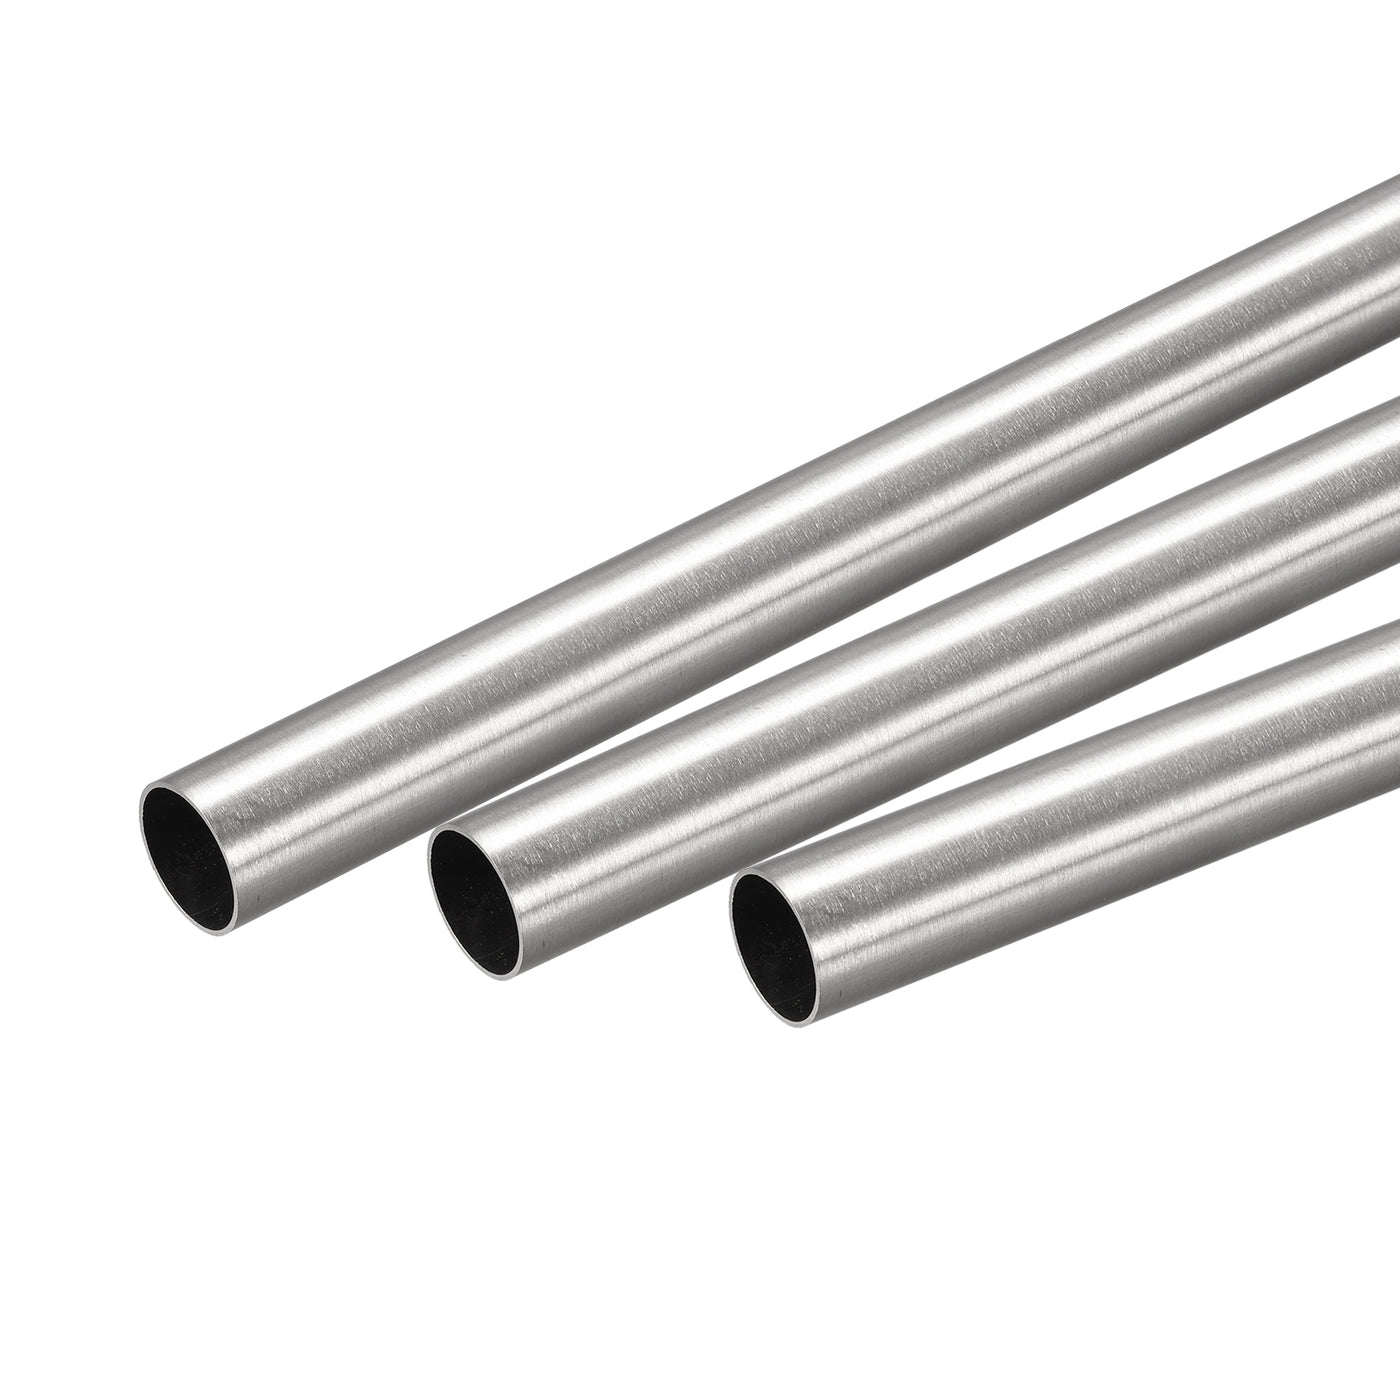 Uxcell Uxcell 304 Stainless Steel Round Tube 14mm OD 0.5mm Wall Thickness 250mm Length 3 Pcs